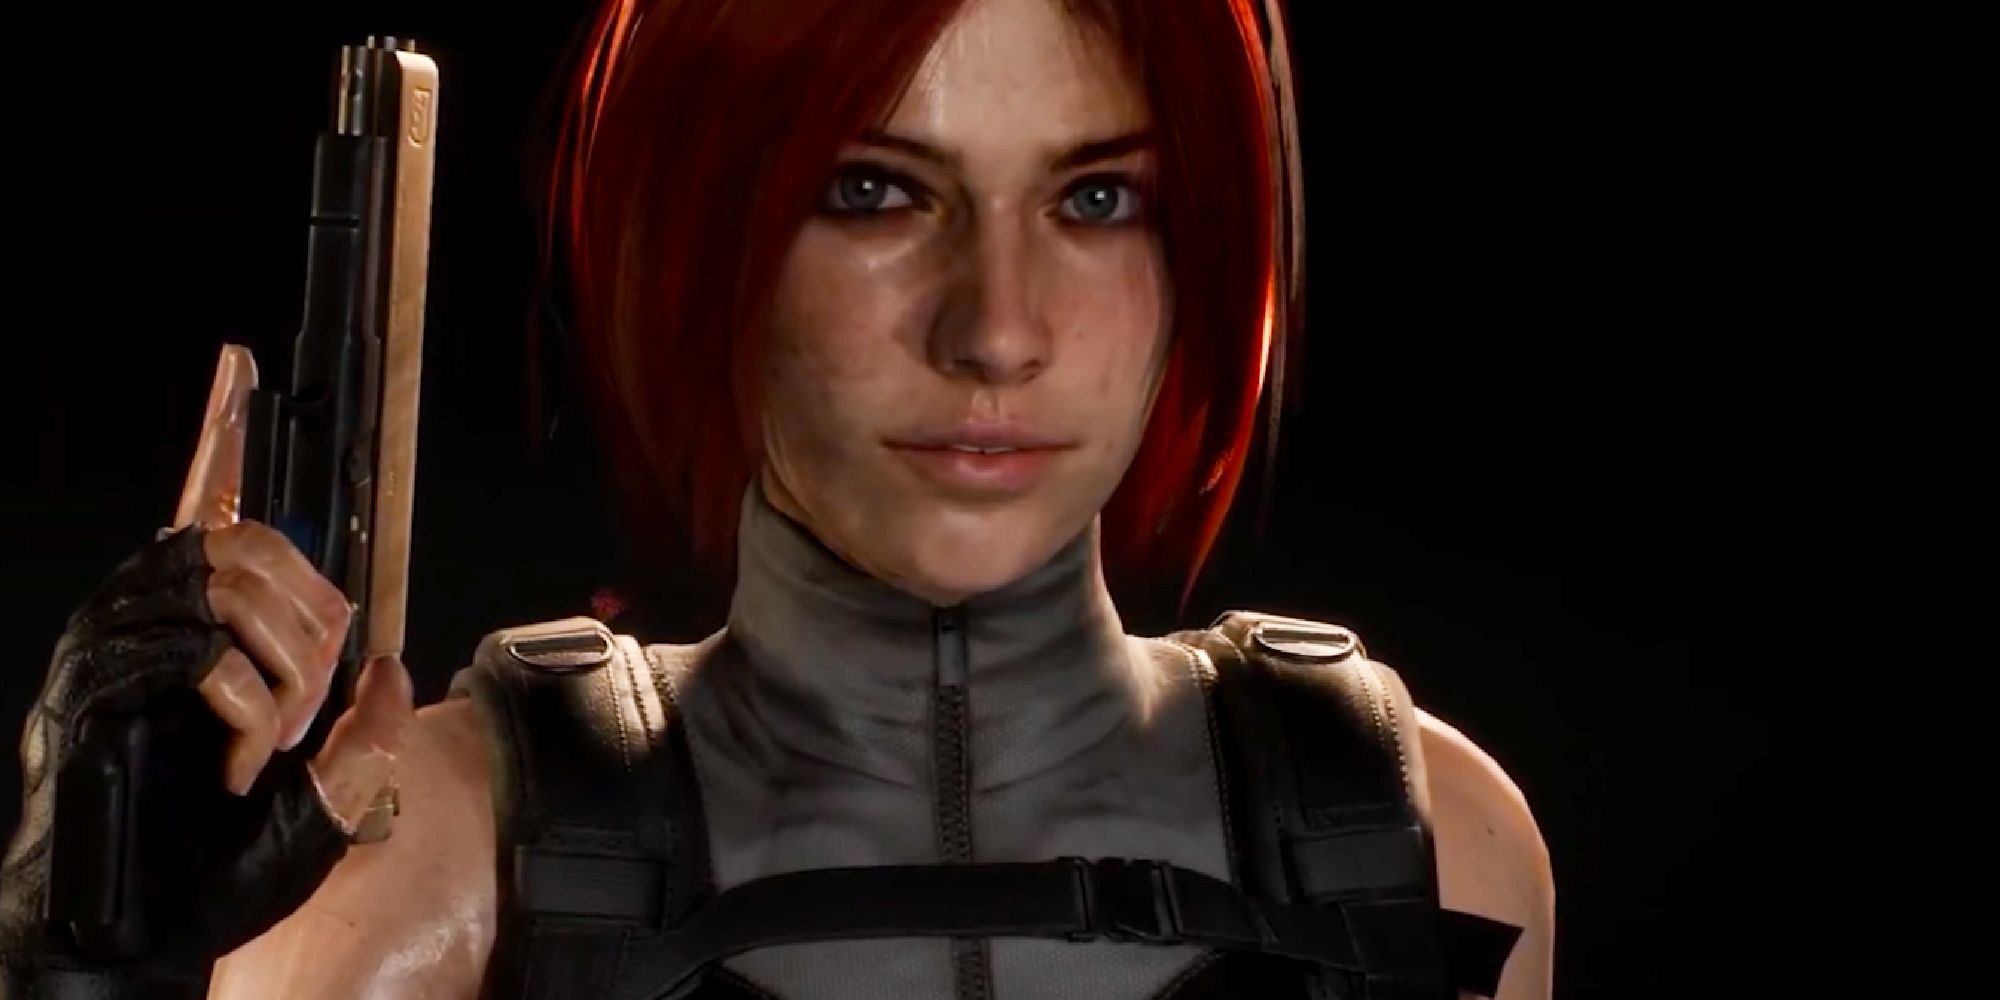 Dino Crisis 2 gets a fan remake in Unreal Engine 4, and it looks incredible